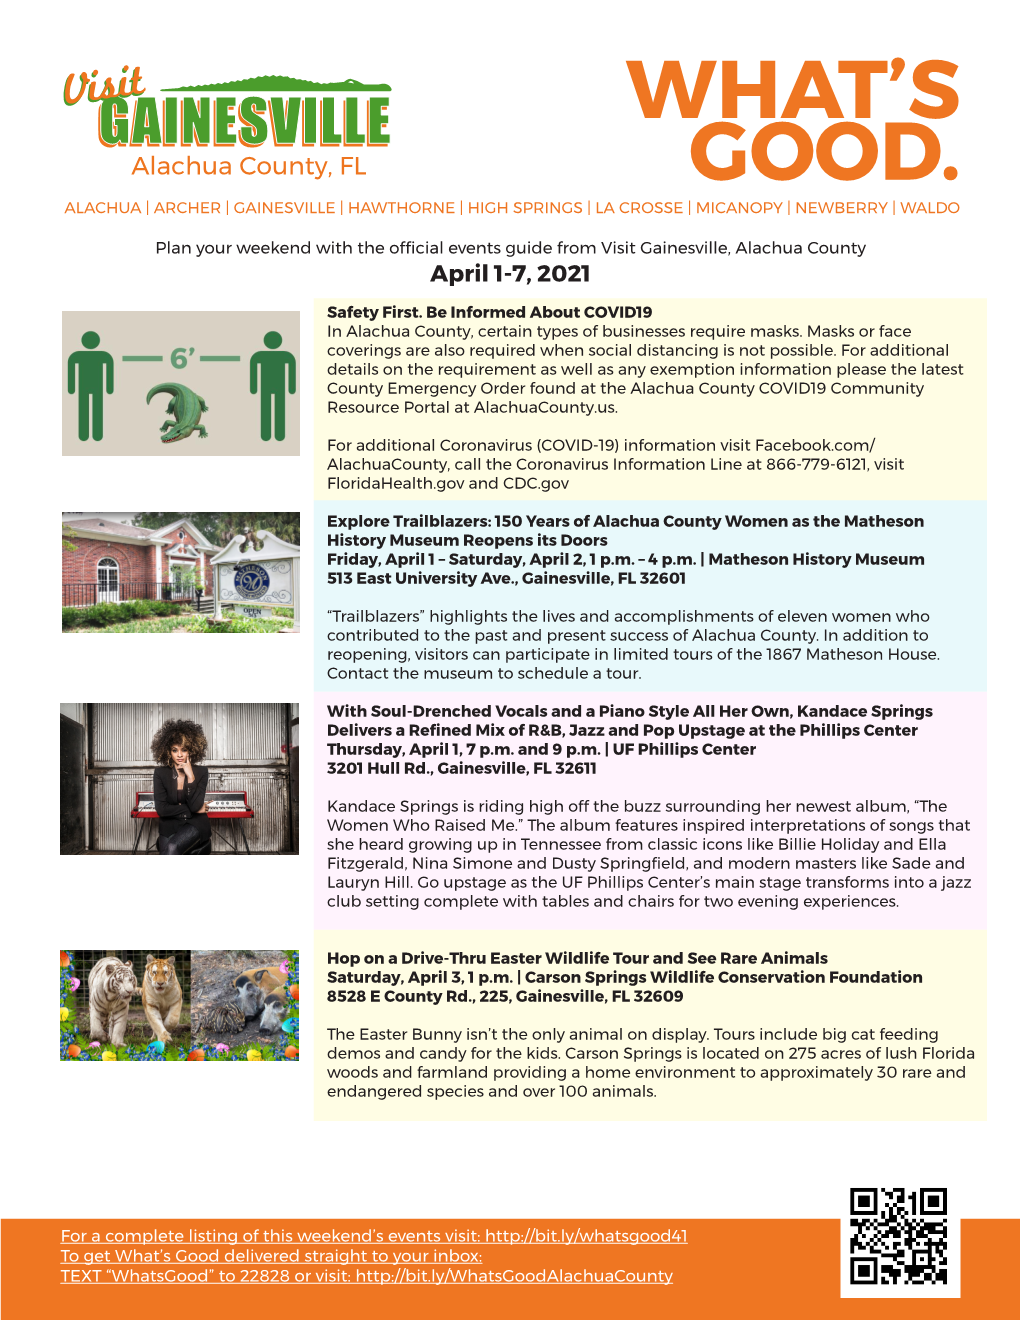 Whats Good Events Guide April 1-7 2021 Gainesville and Alachua County